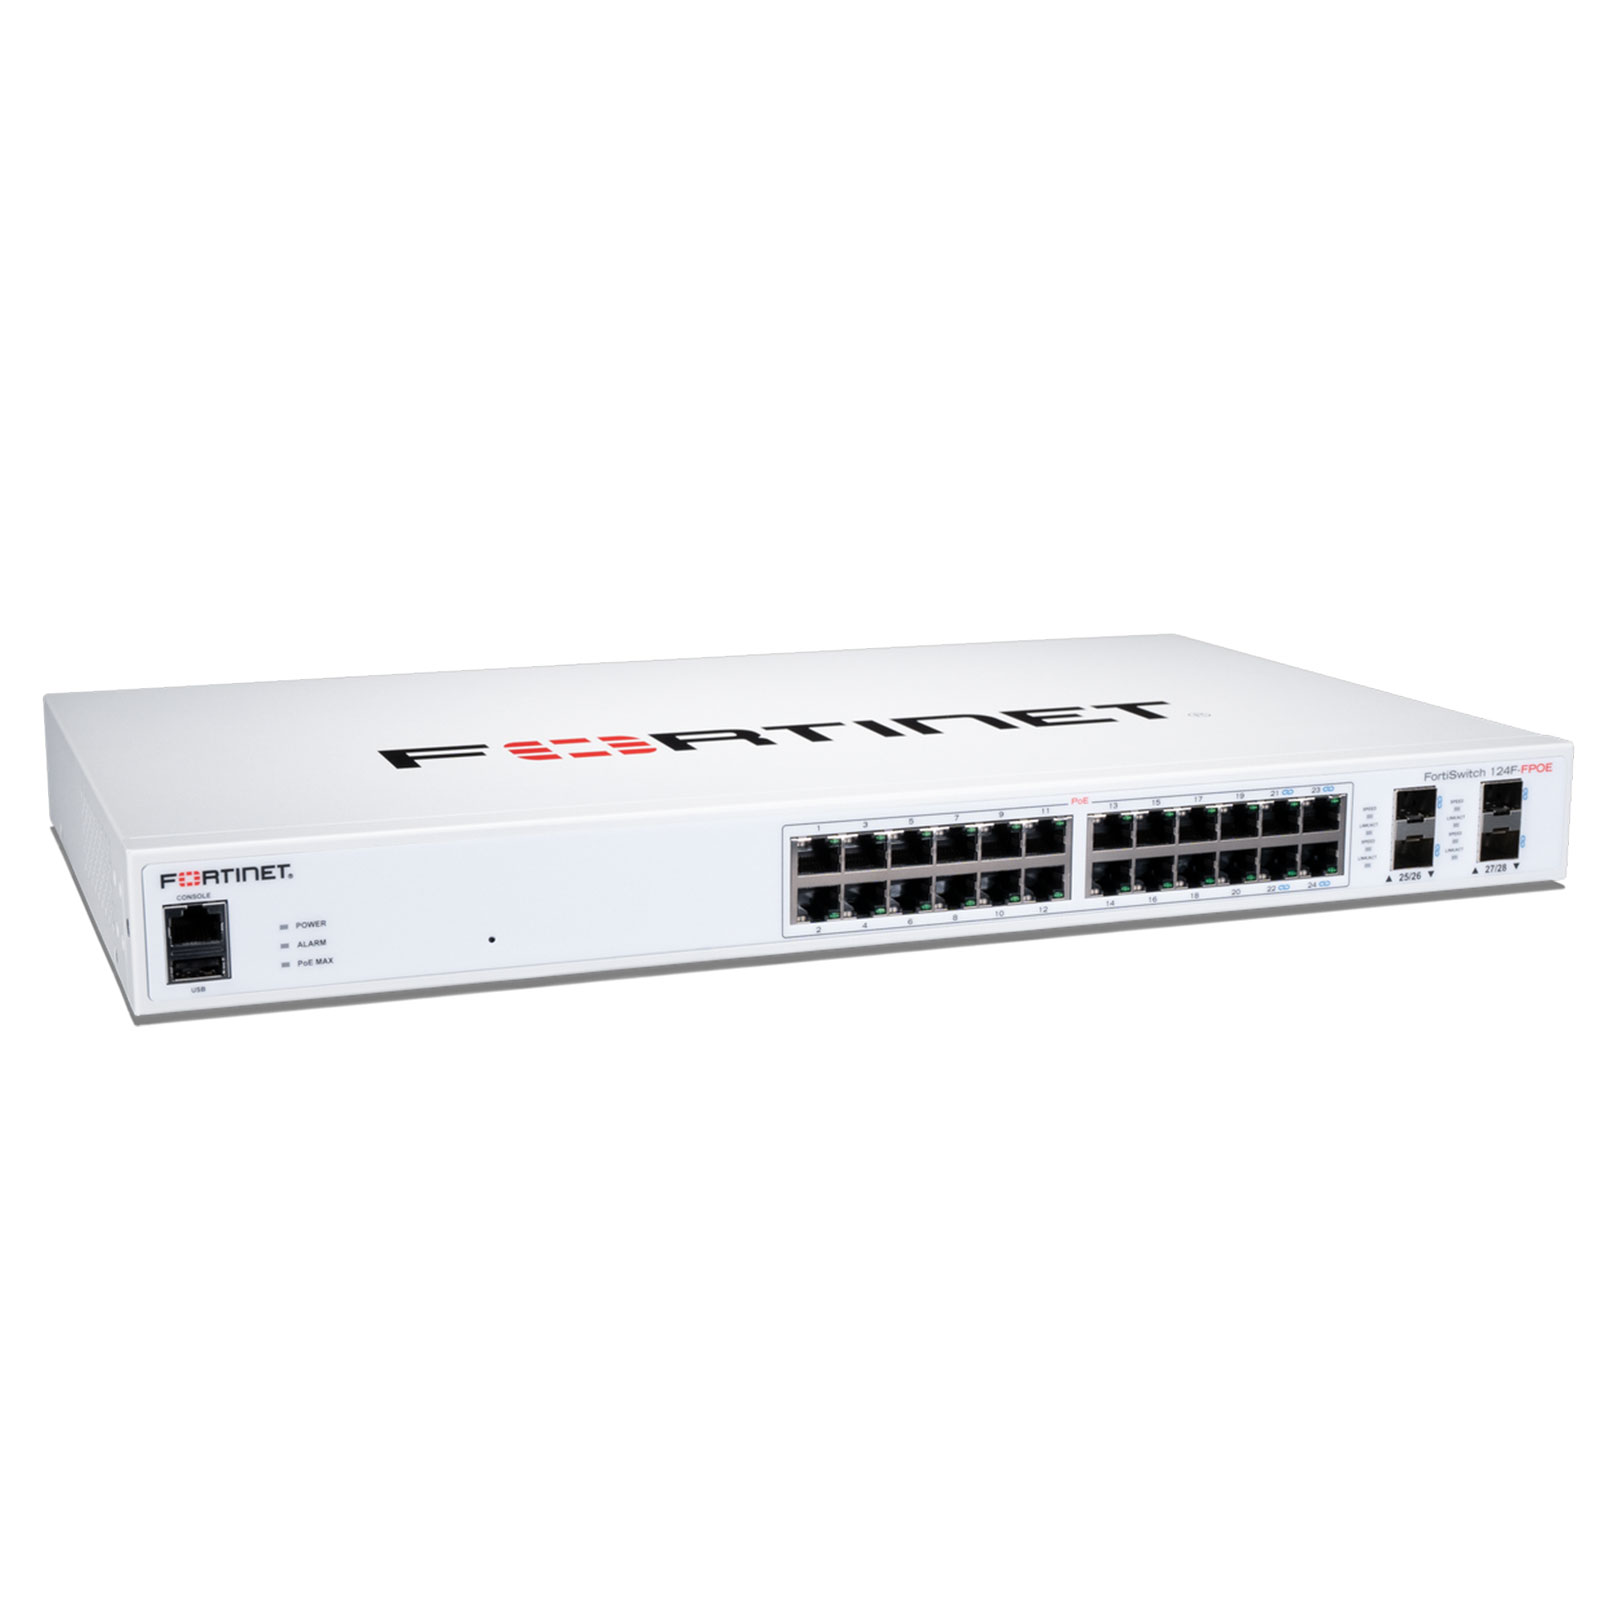 Fortinet FortiSwitch 124F FPOE